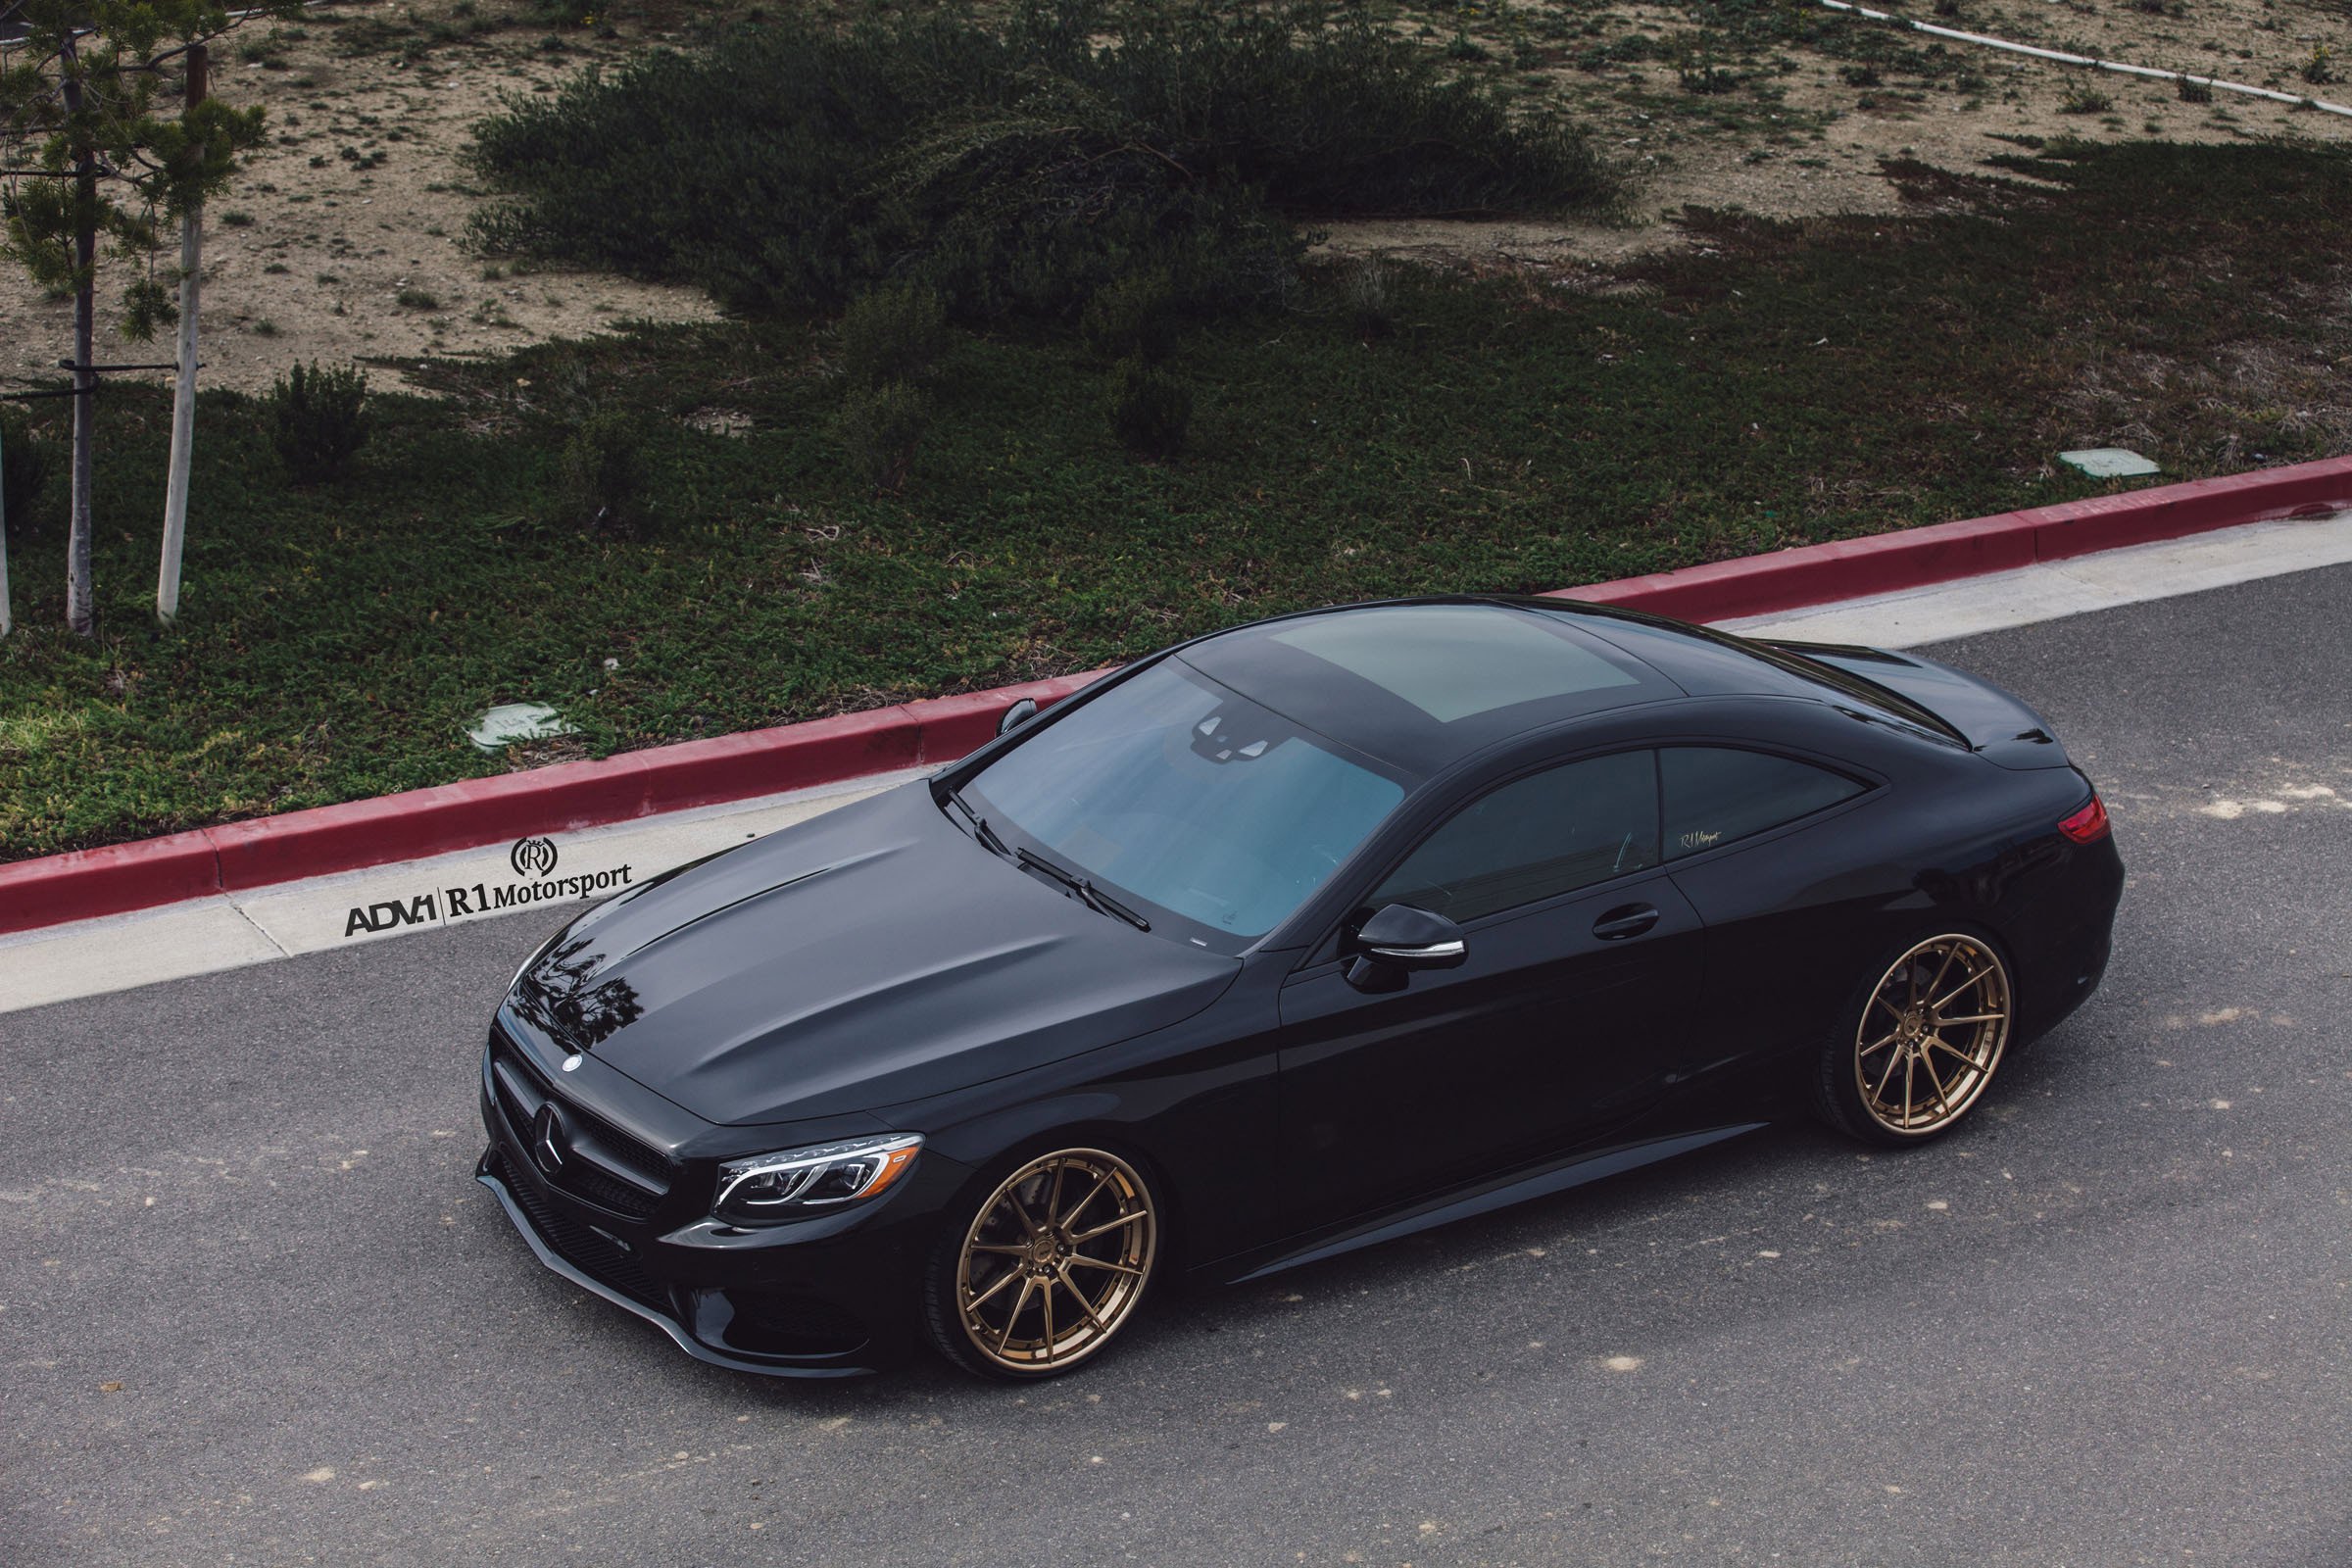 mercedes, S class, Coupe, Cars, Adv1, Wheels Wallpaper